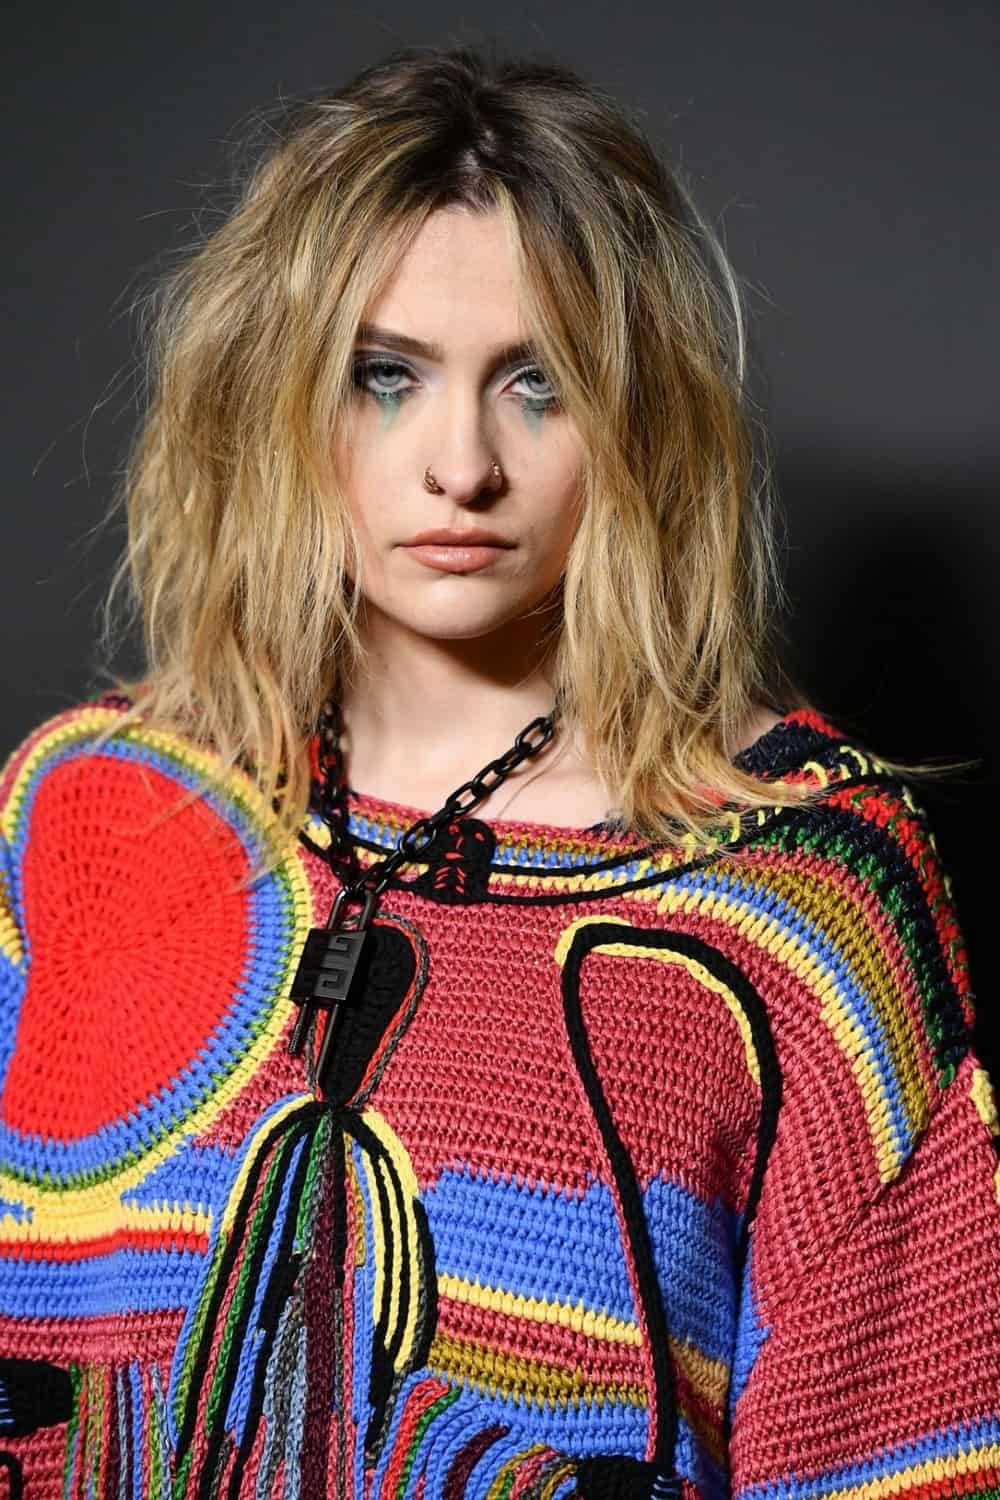 Paris Jackson Appears Attractive in a Long Knitted Sweater During PFW 2022